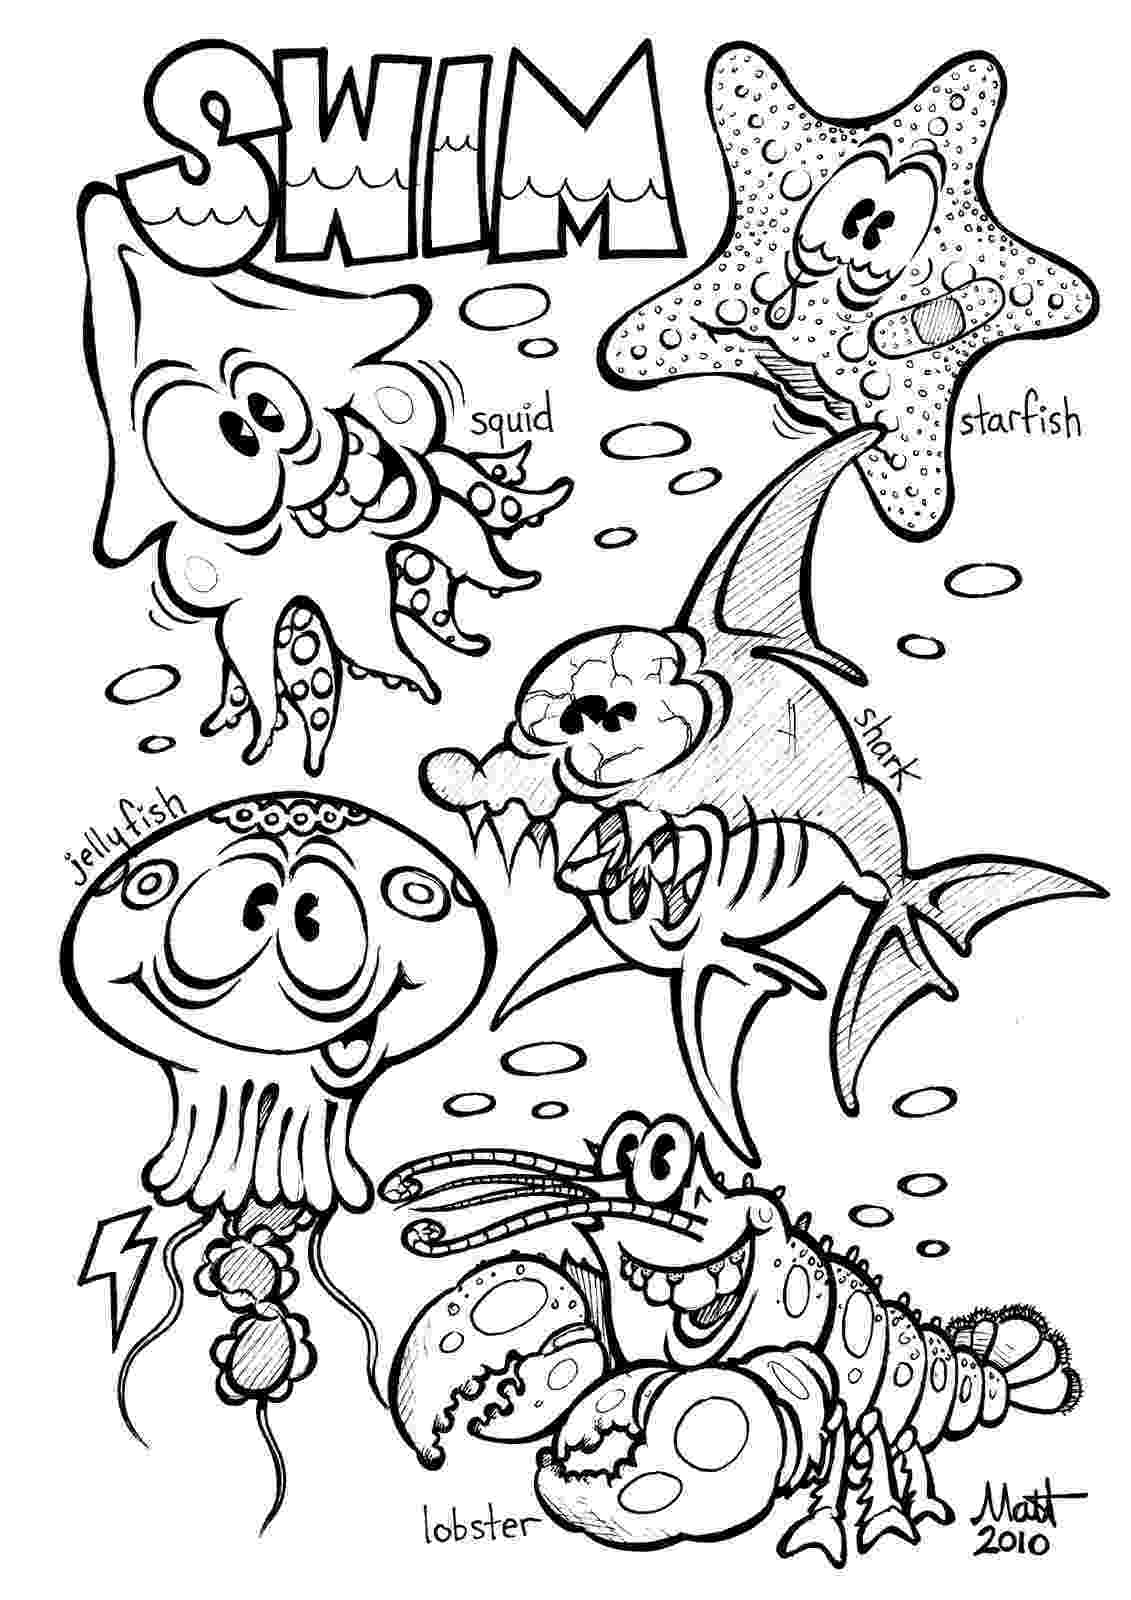 animal coloring sheets 10 cute animals coloring pages coloring sheets animal 1 1